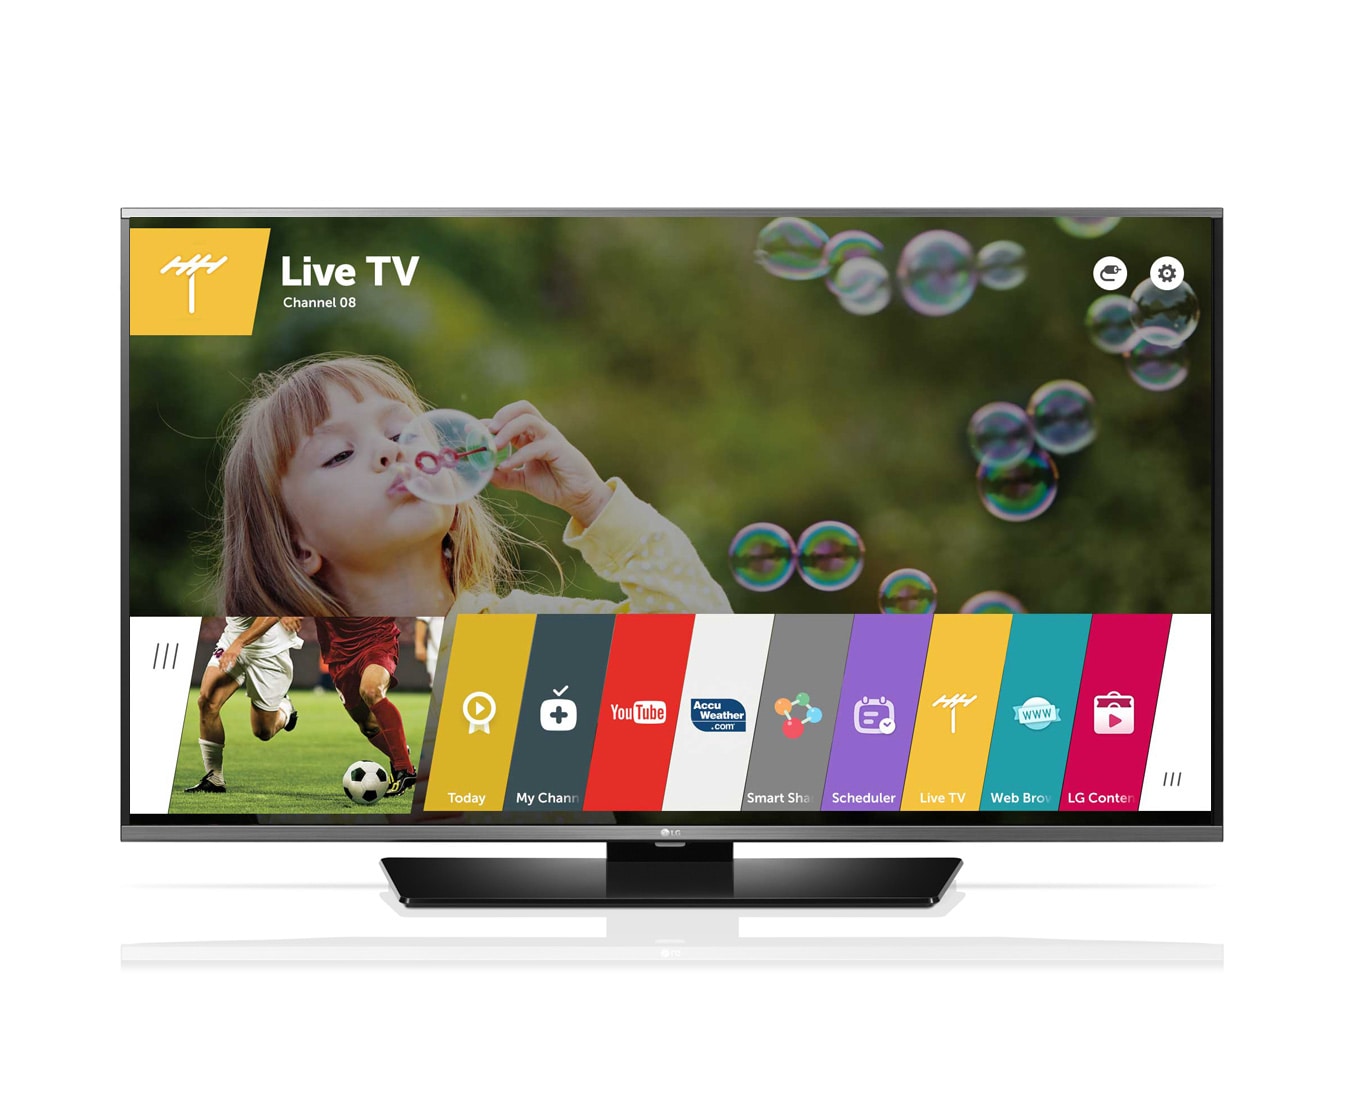 LG Smart TV with webOS 2.0, 55LF6300